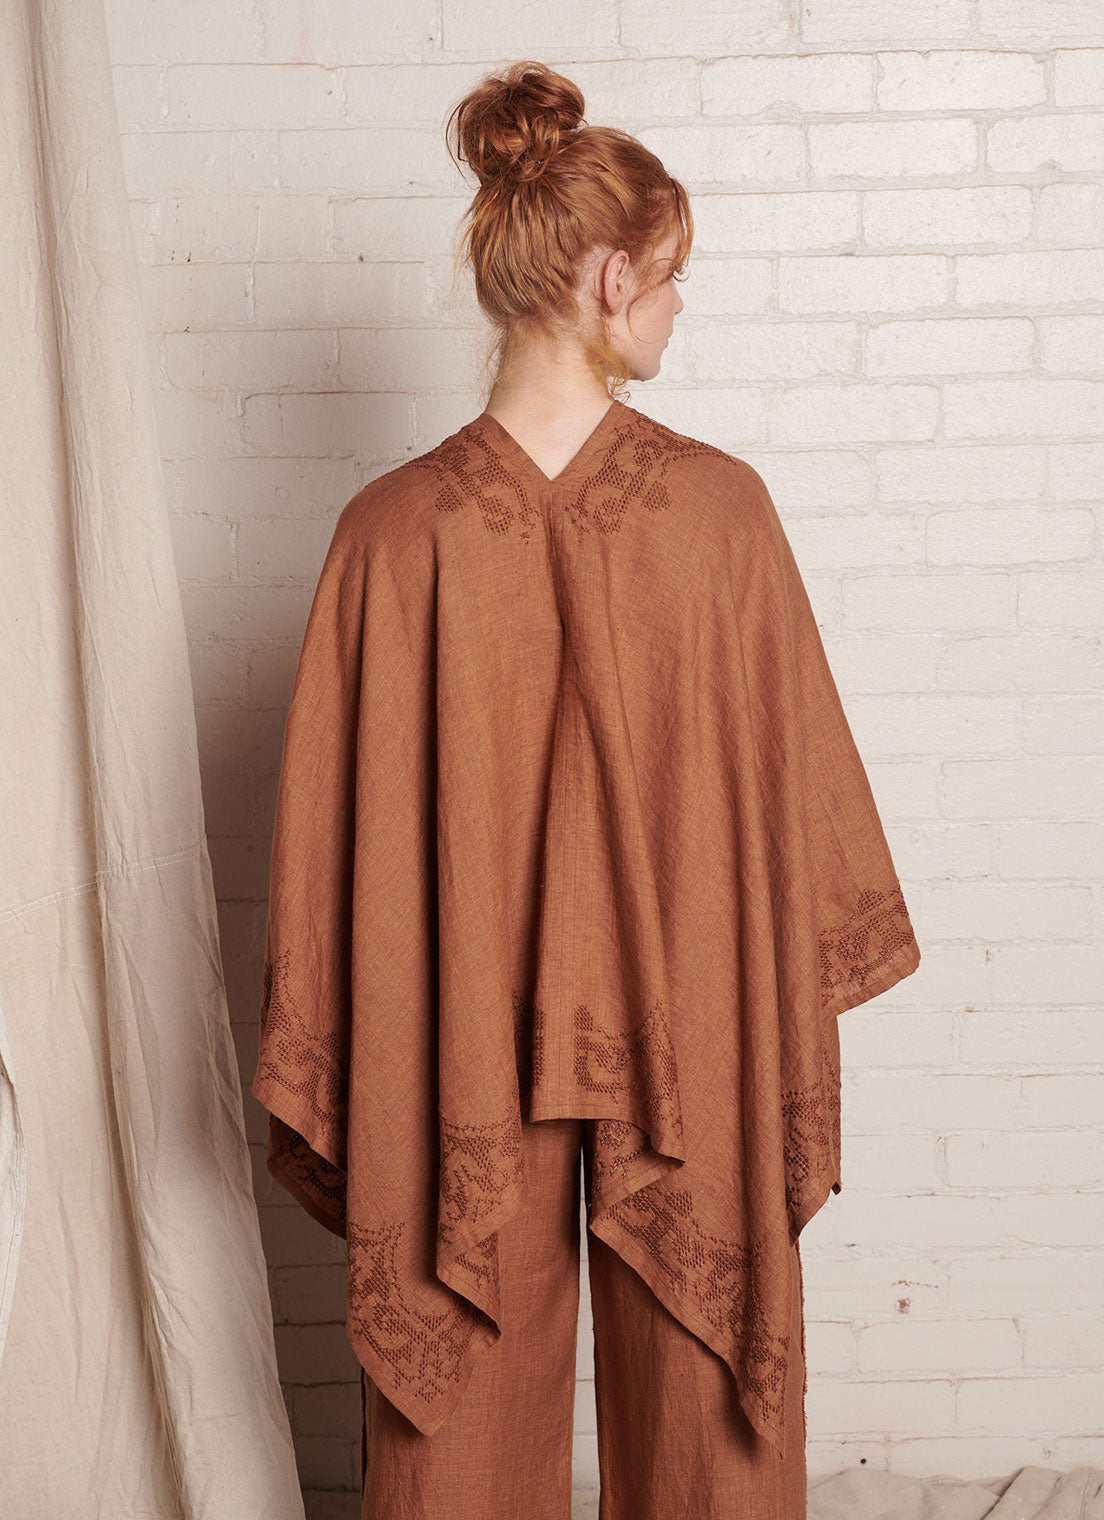 A one size, easy fit, bronze embroidered cape shawl made from European pure linen